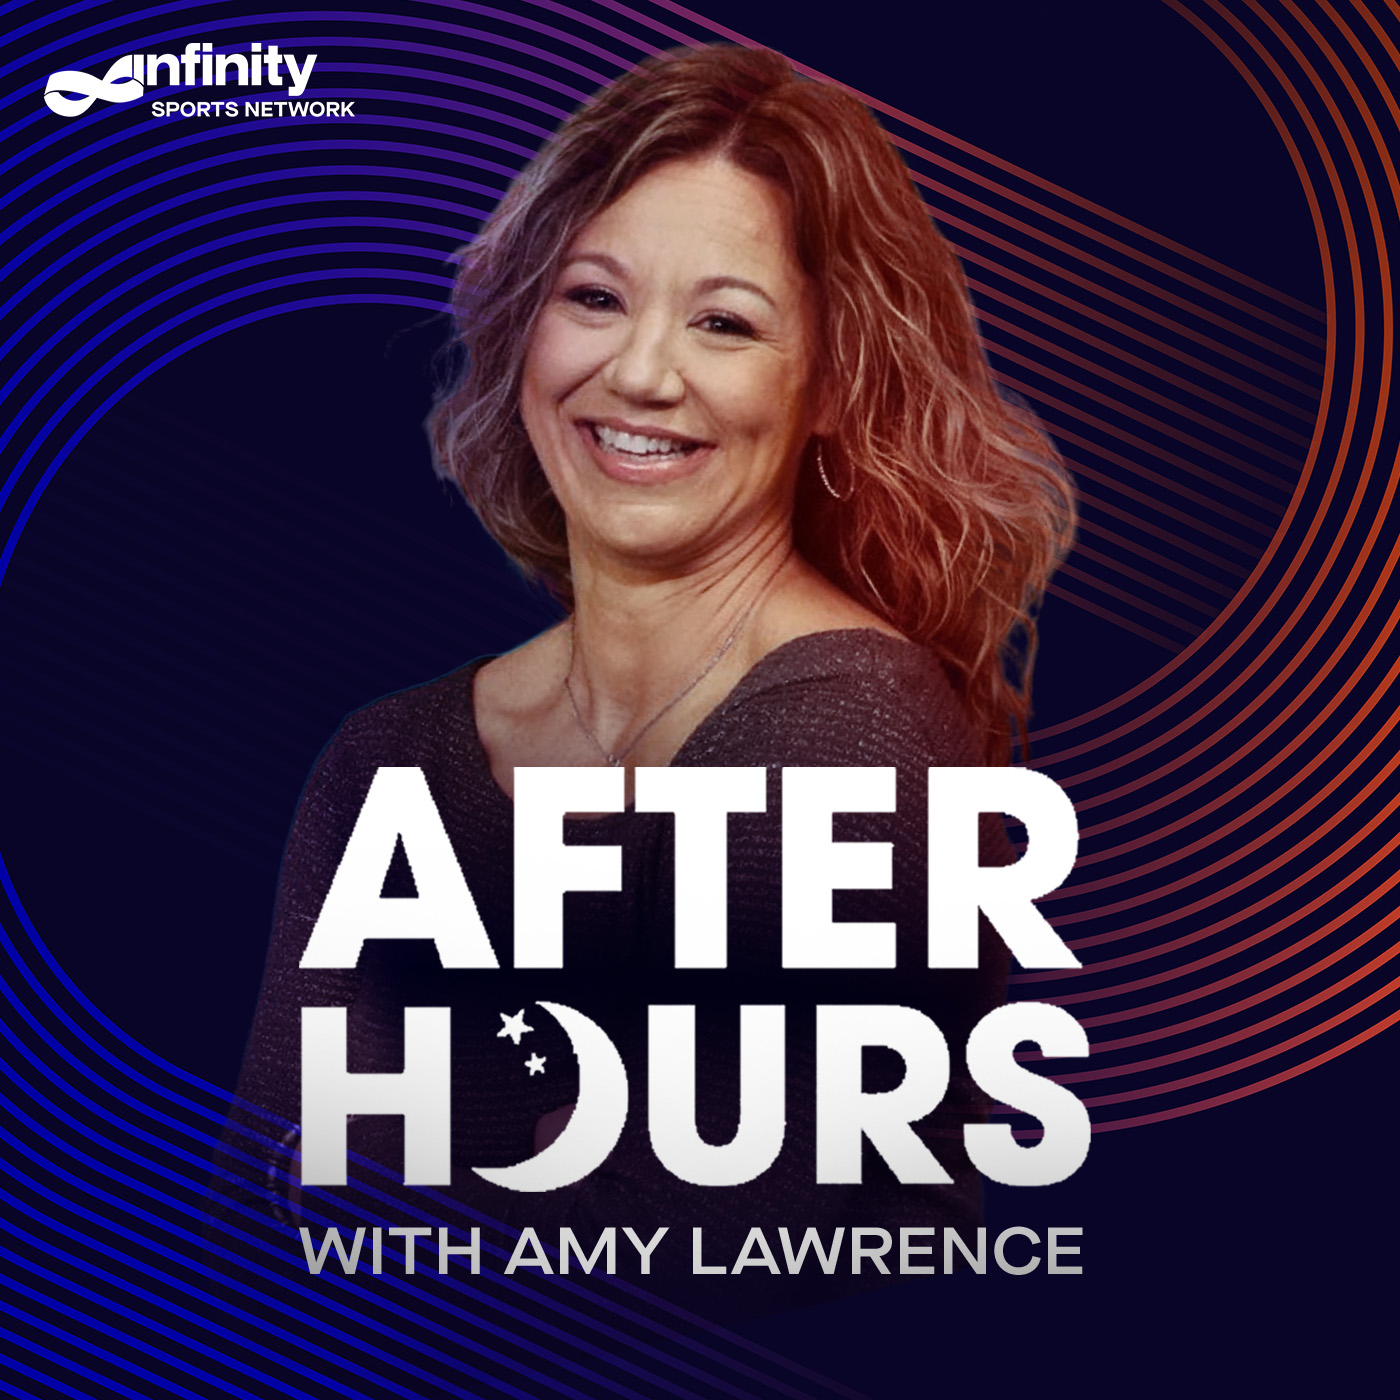 4/15/21 After Hours with Amy Lawrence PODCAST: Hour 4